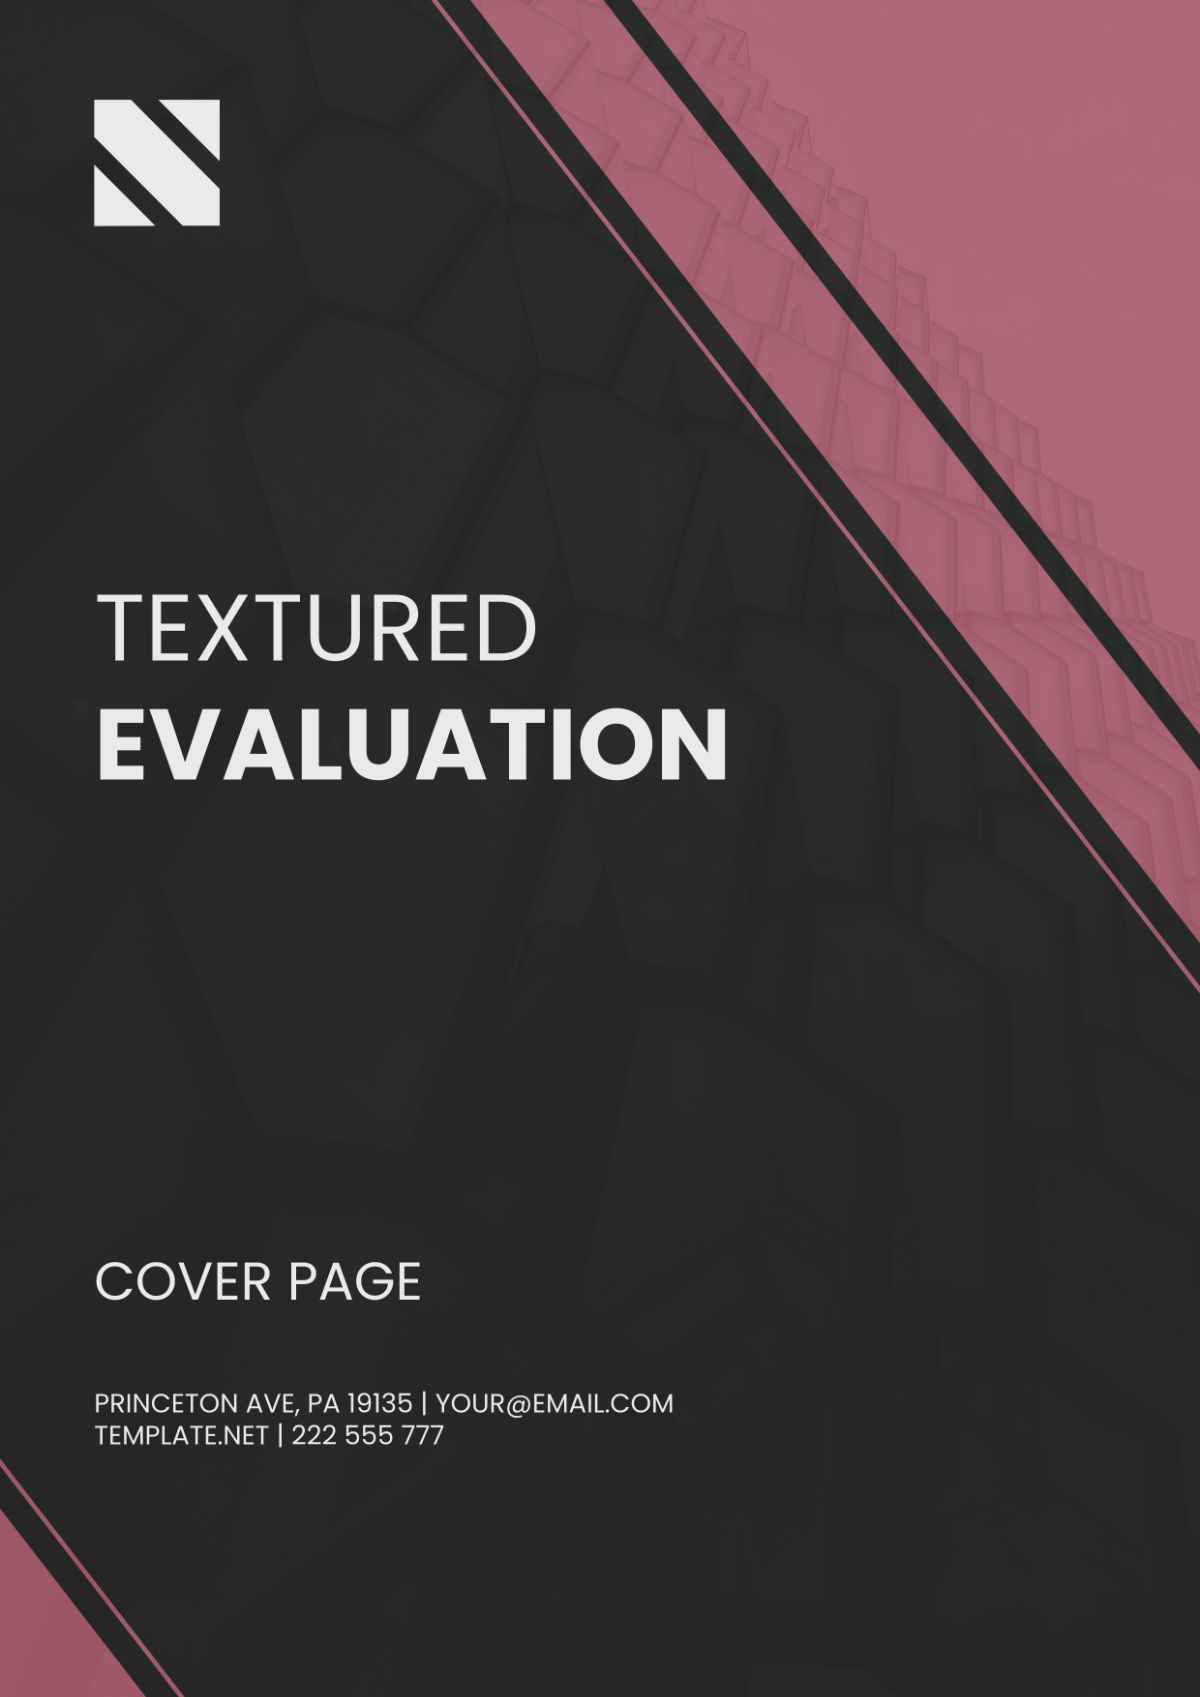 Textured Evaluation Cover Page Template